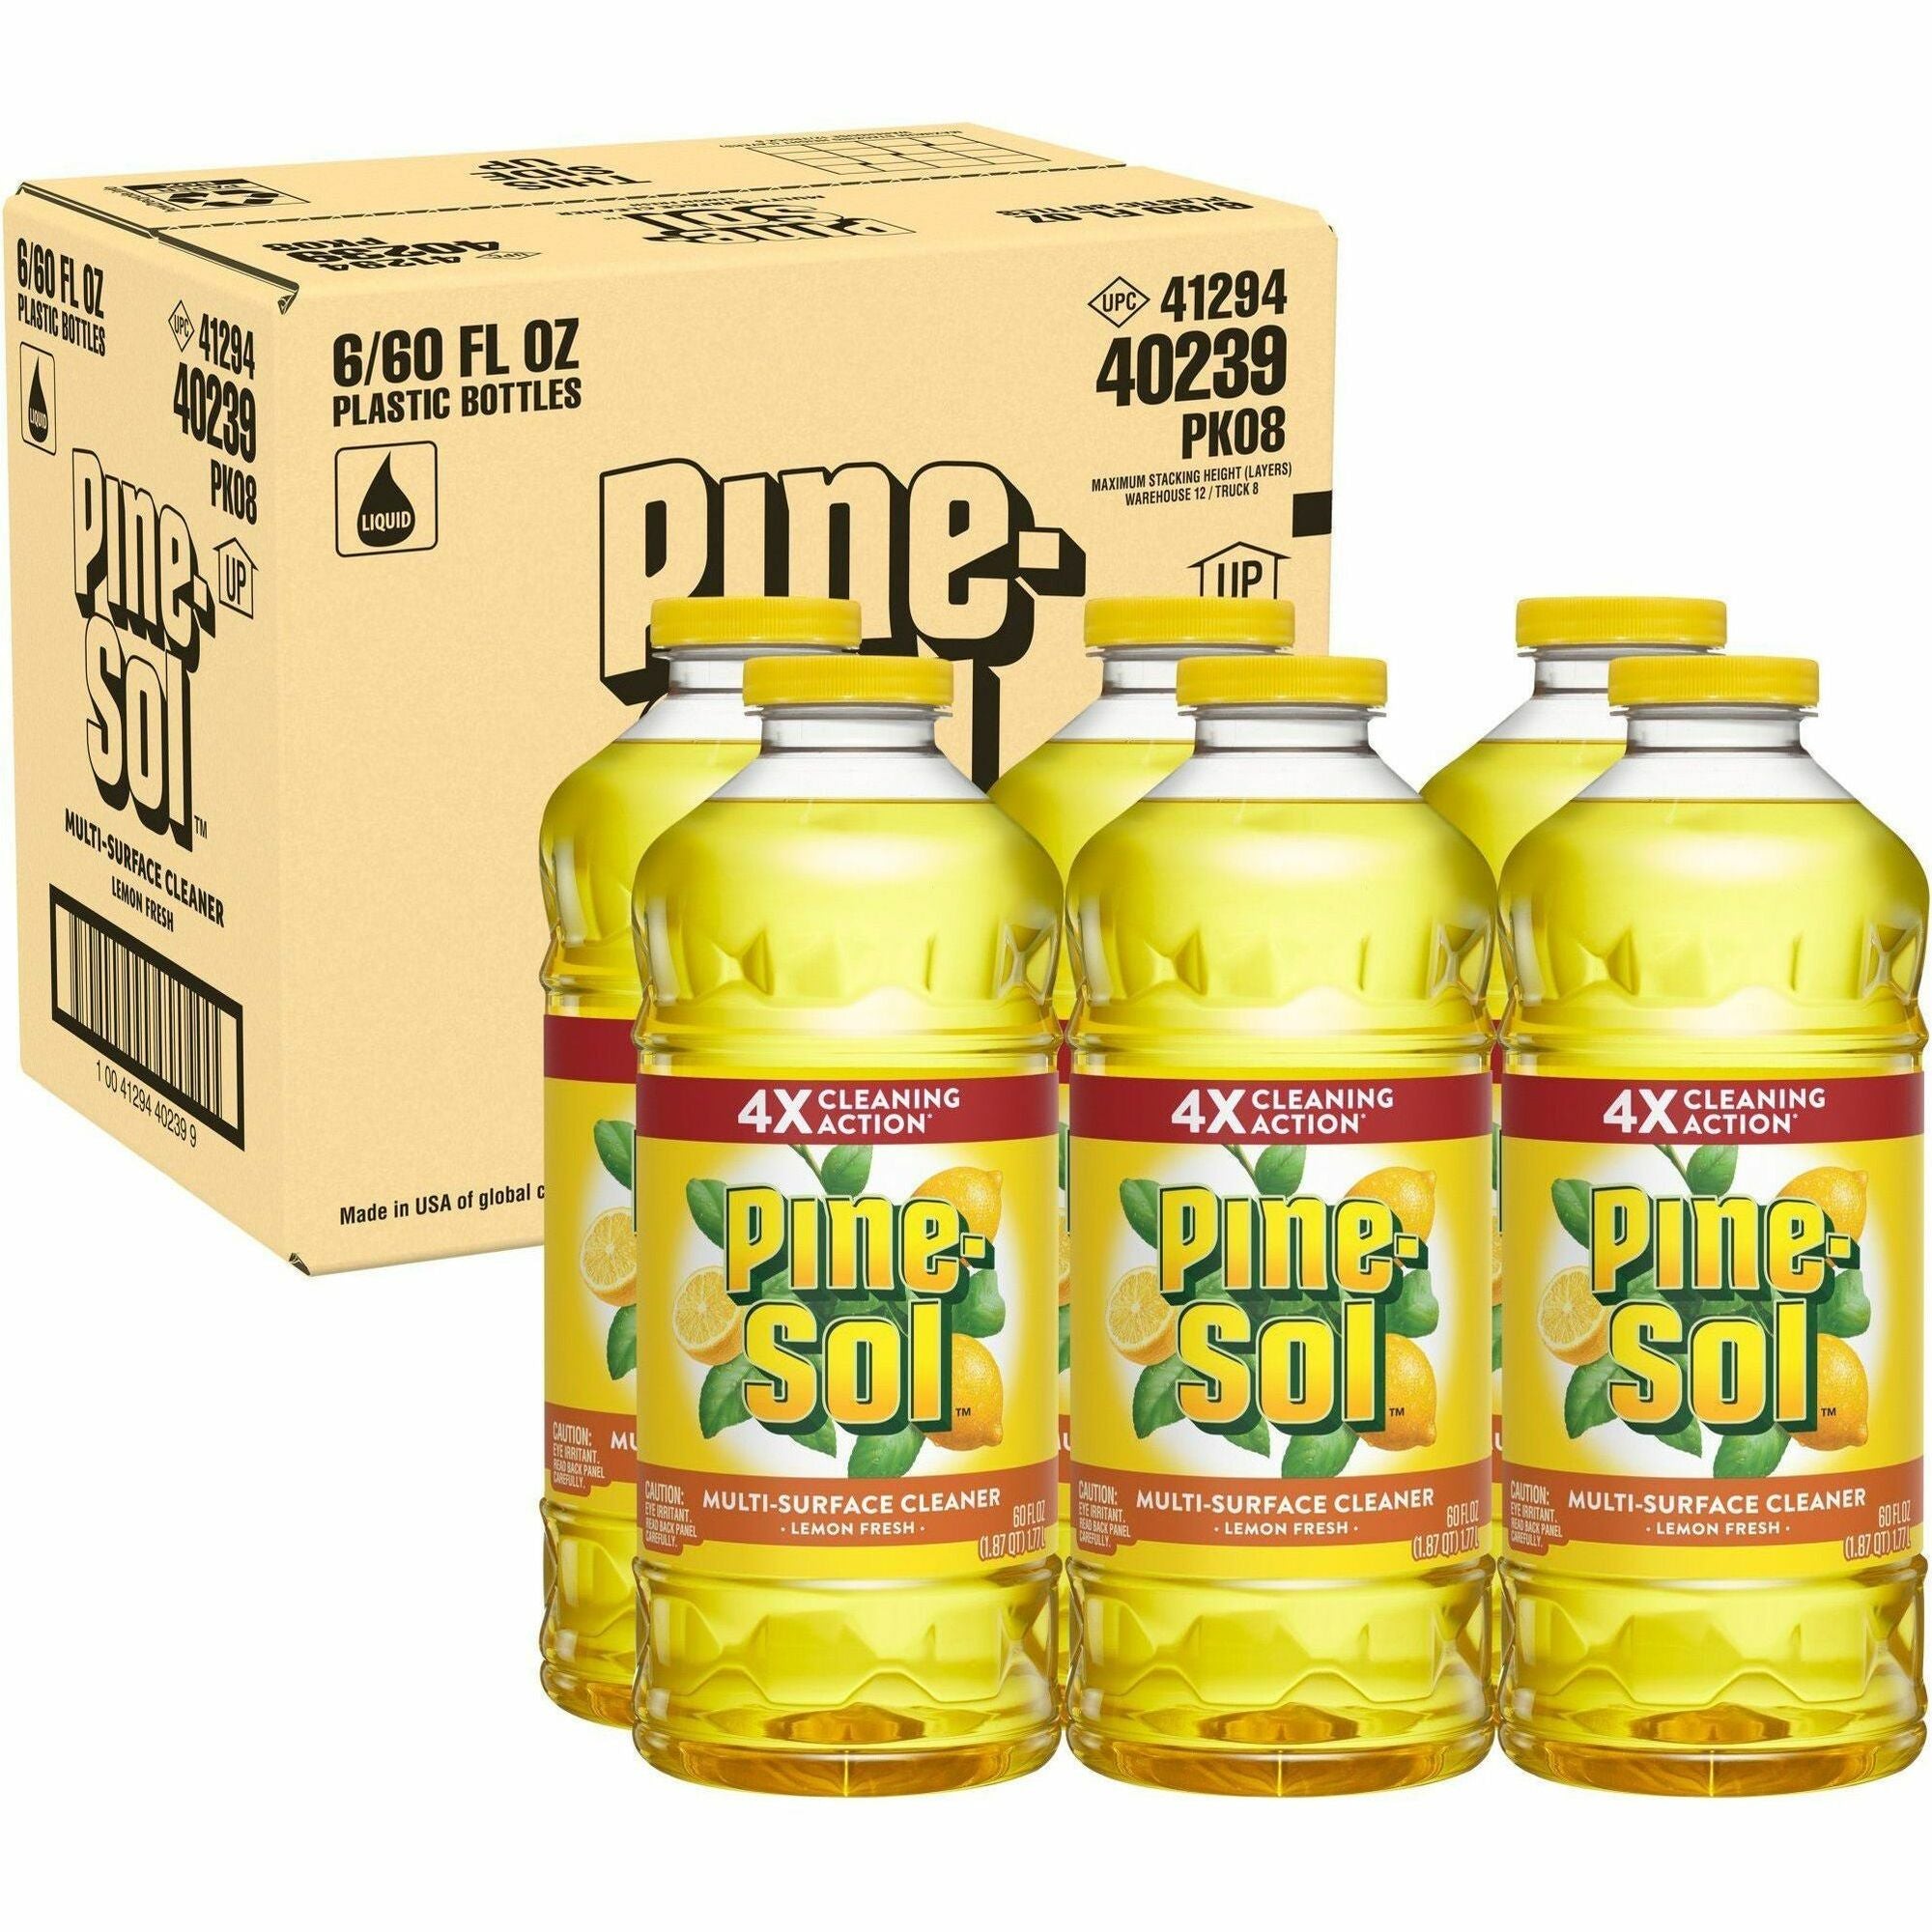 Pine-Sol All Purpose Cleaner - Concentrate - 60 fl oz (1.9 quart) - Lemon Fresh Scent - 6 / Carton - Deodorize, Residue-free, Disinfectant - Yellow - 1